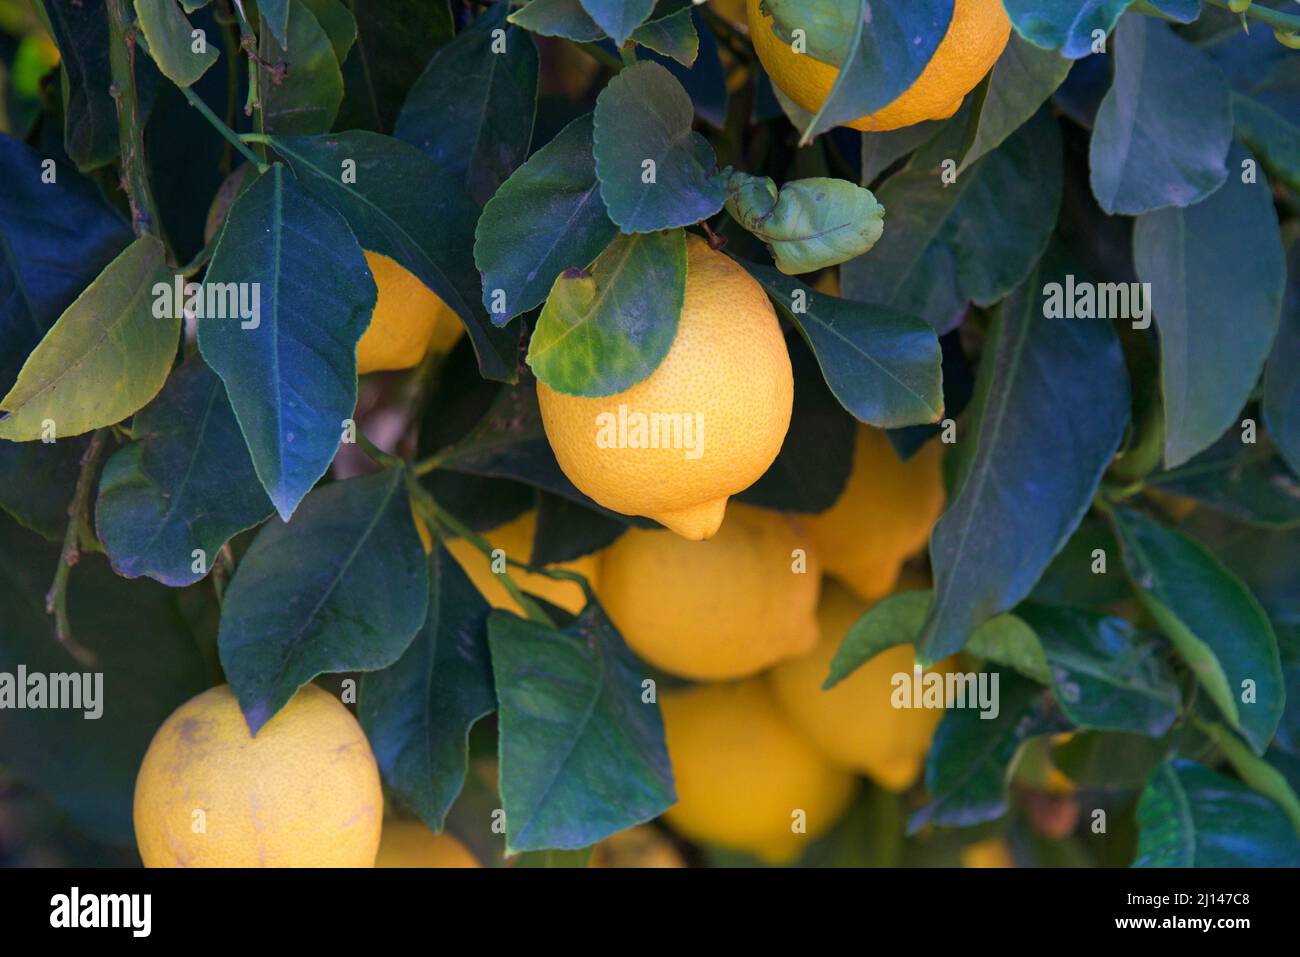 Close up of Lisbon lemons ripening on the tree, surrounded by green leaves. One of the most widely available varieties of lemon found in shops worldwi Stock Photo